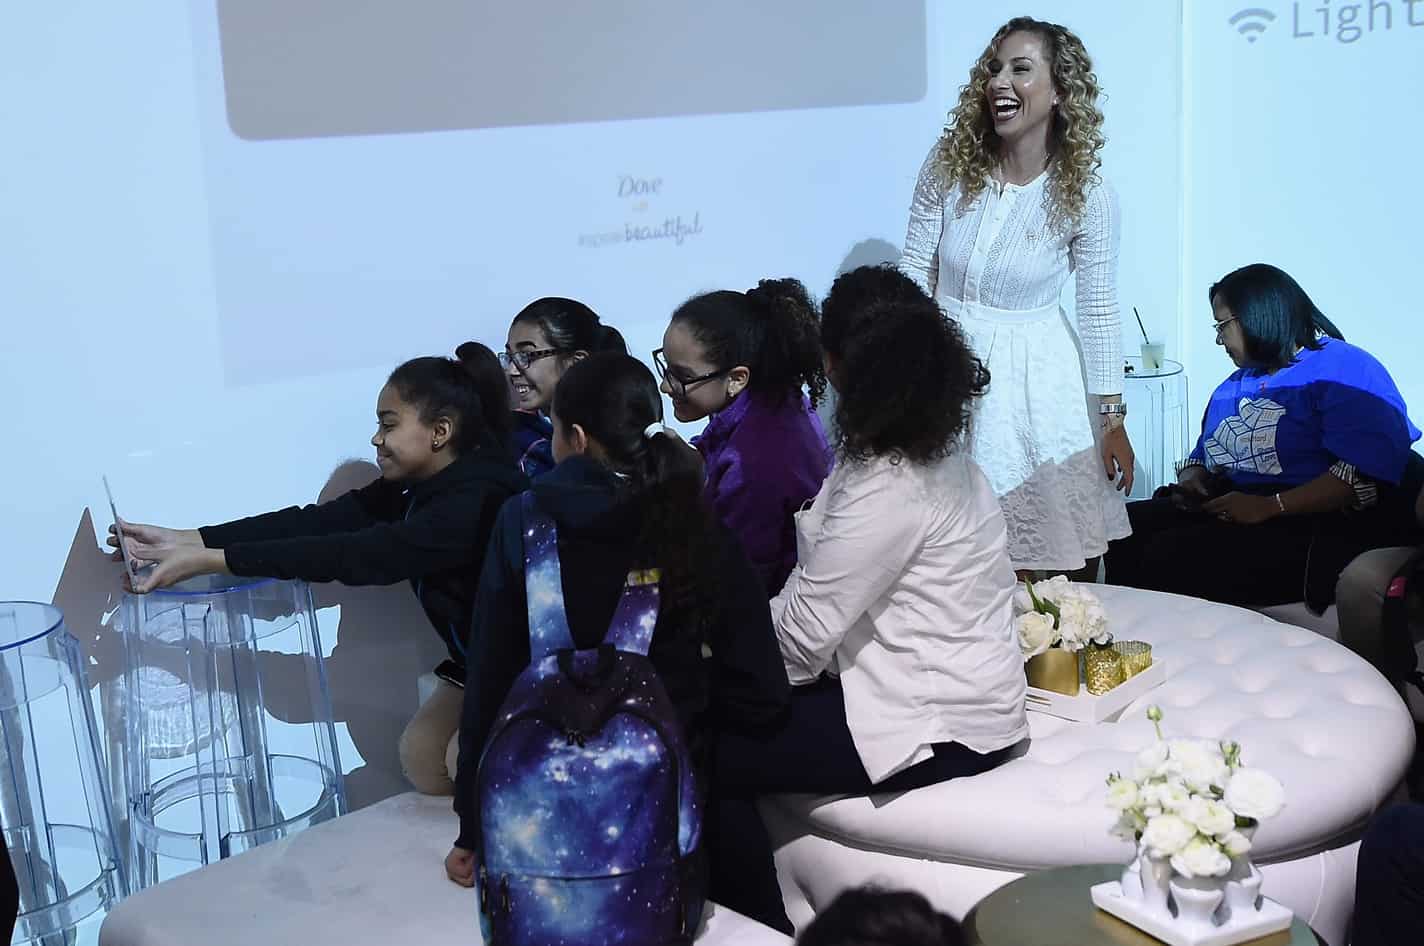 Jeannette Kaplun speaks with girls about body positivity at a Dove Self-Esteem Workshop to encourage girls to #speakbeautiful on October 20, 2016 in New York City. Visit twitter.com/dove to join the movement and help inspire online body positivity and confidence for the next generation. (Photo by Ilya S. Savenok/Getty Images for Dove) *** Local Caption *** Jeannette Kaplun